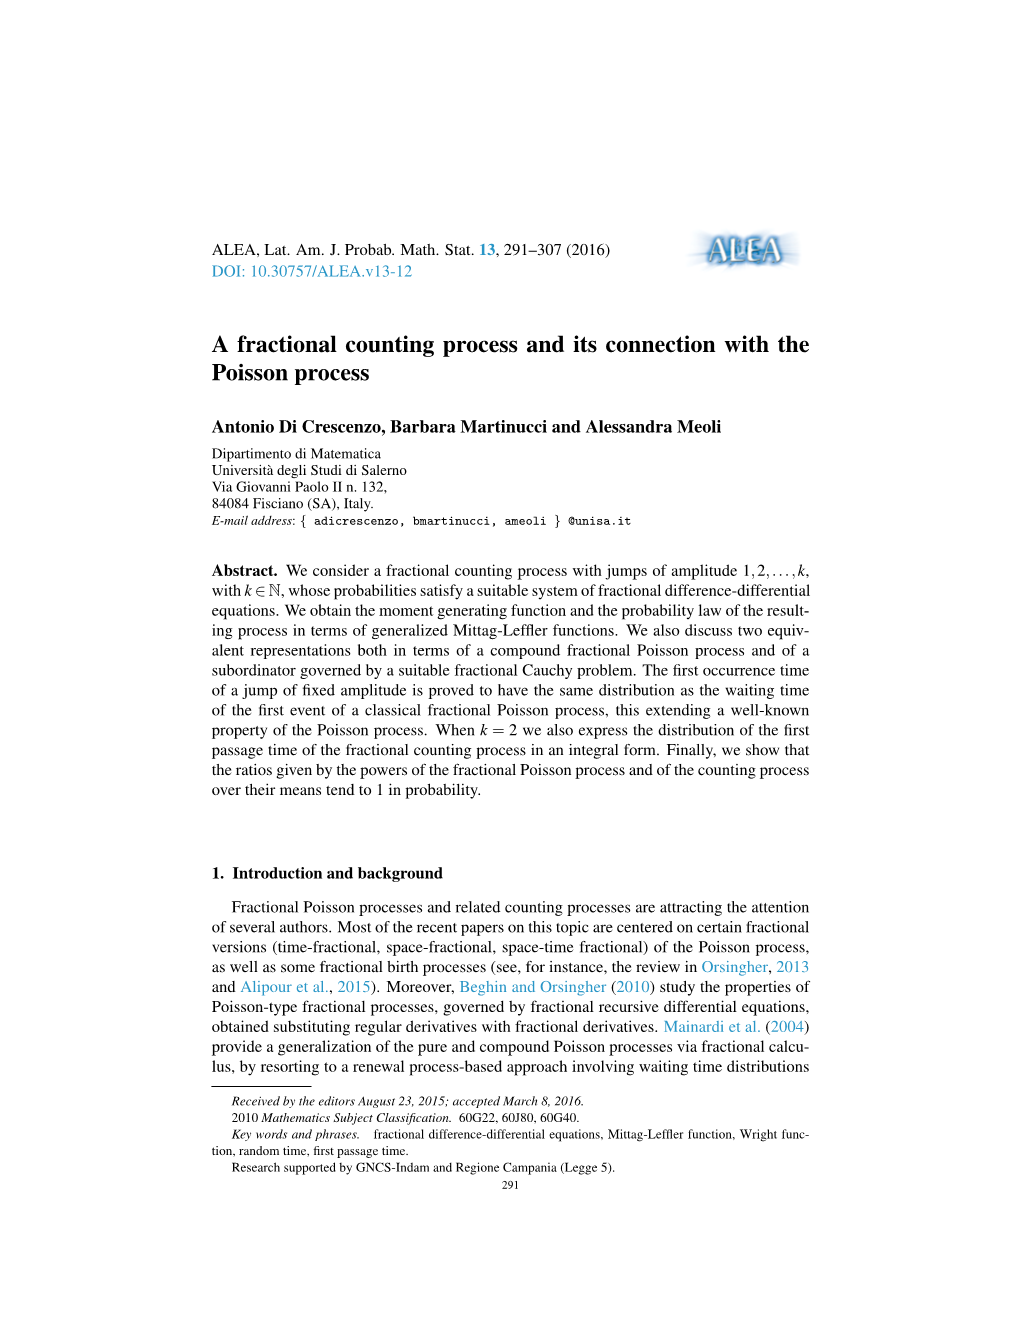 A Fractional Counting Process and Its Connection with the Poisson Process